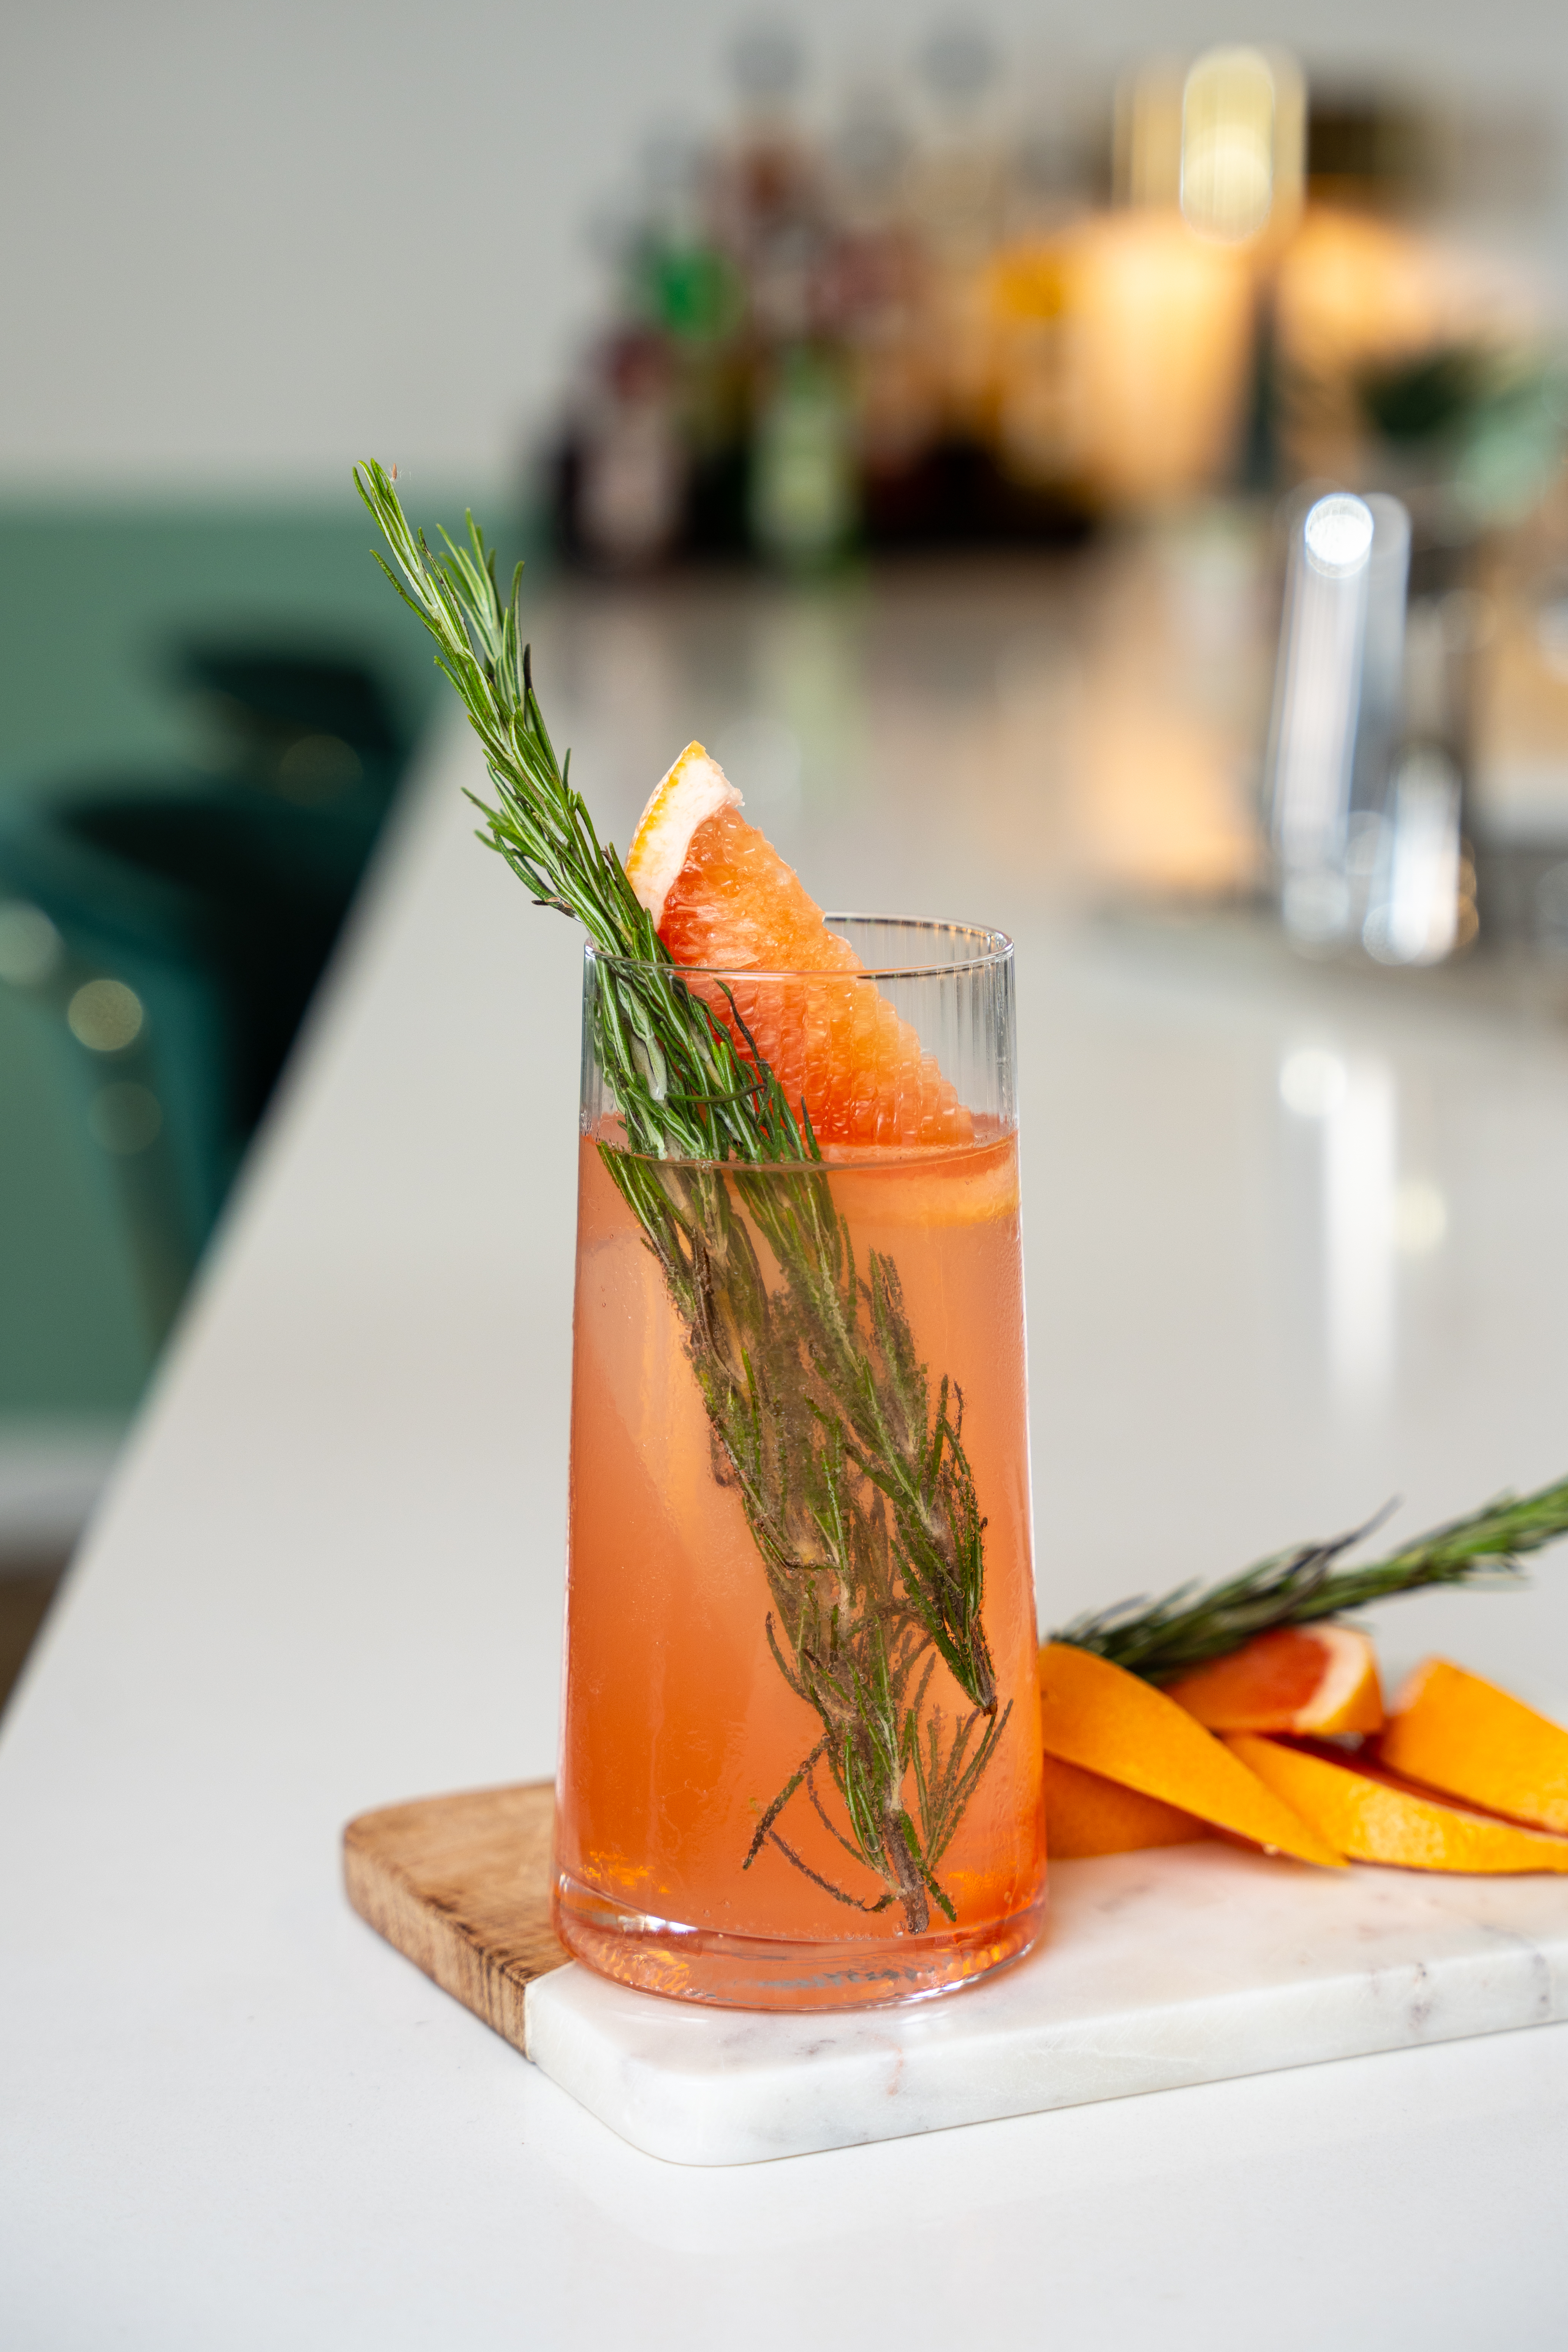 A tumbler glass is placed atop a serving tray on a long marble bar surface. Inside the glass is a pink coloured drink, rosemary and a grapefruit wedge.